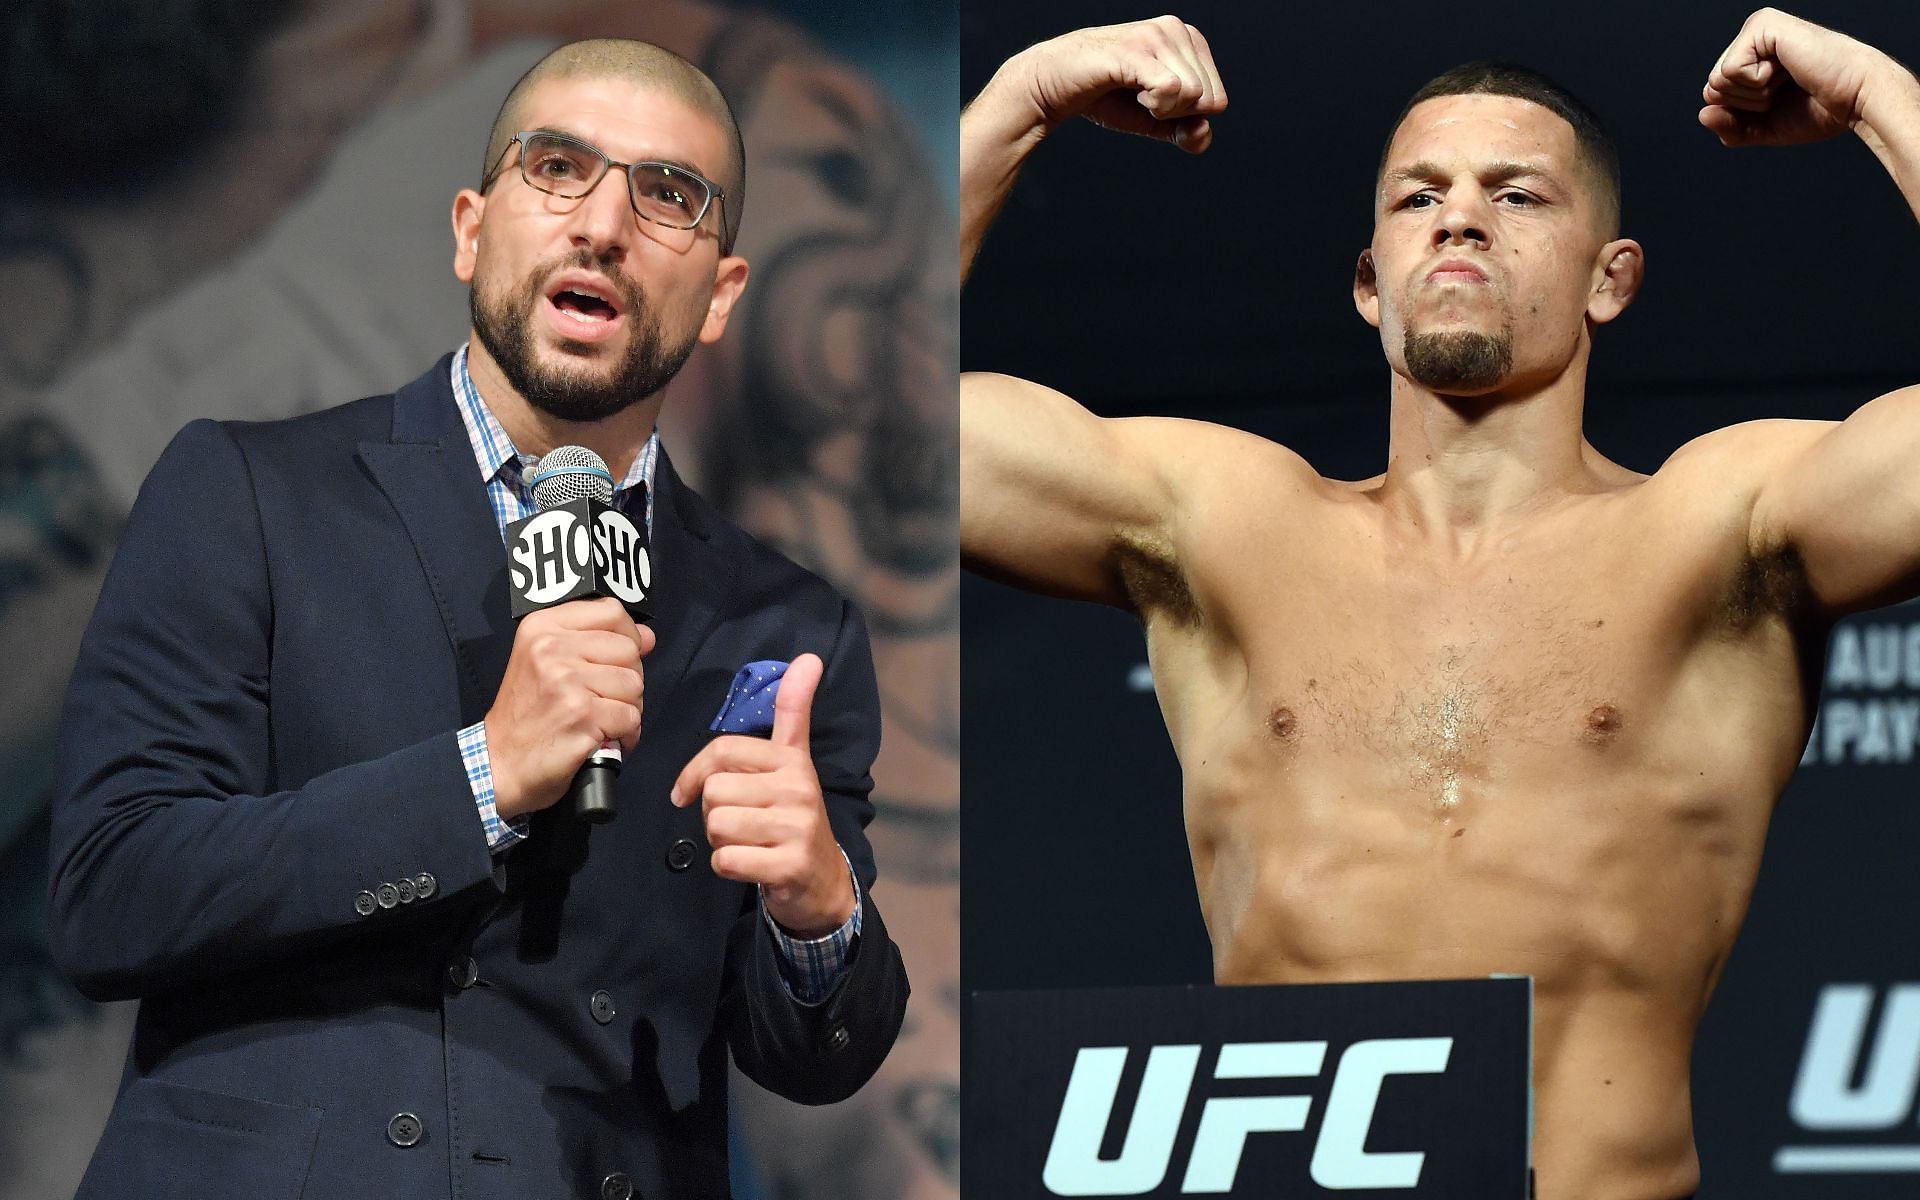 Ariel Helwani (left) and Nate Diaz (right) (Images via Getty)